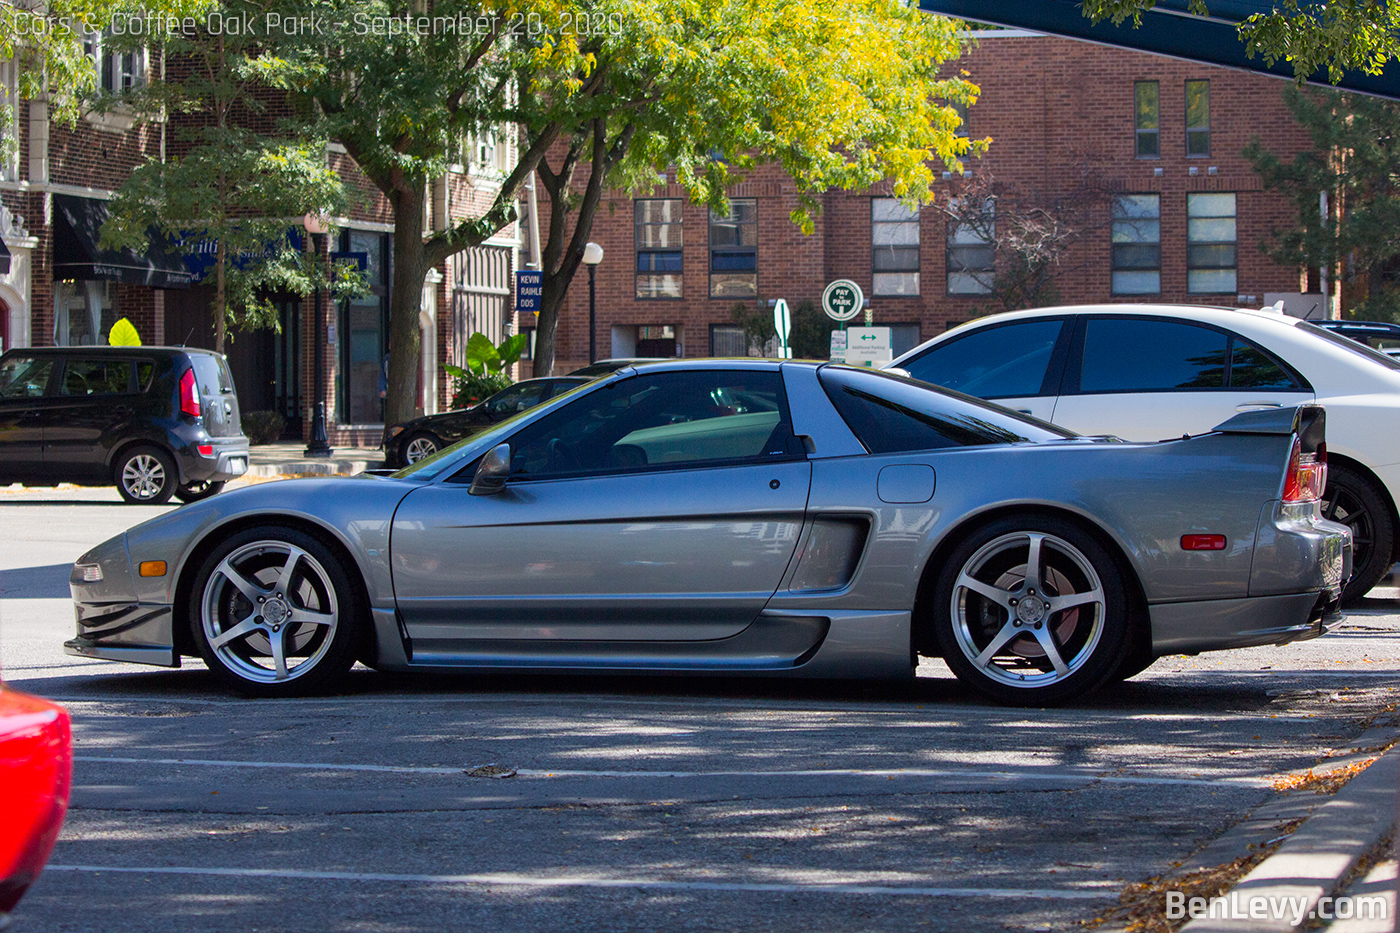 Silver Acura NSX at Cars & Coffee Oak Park